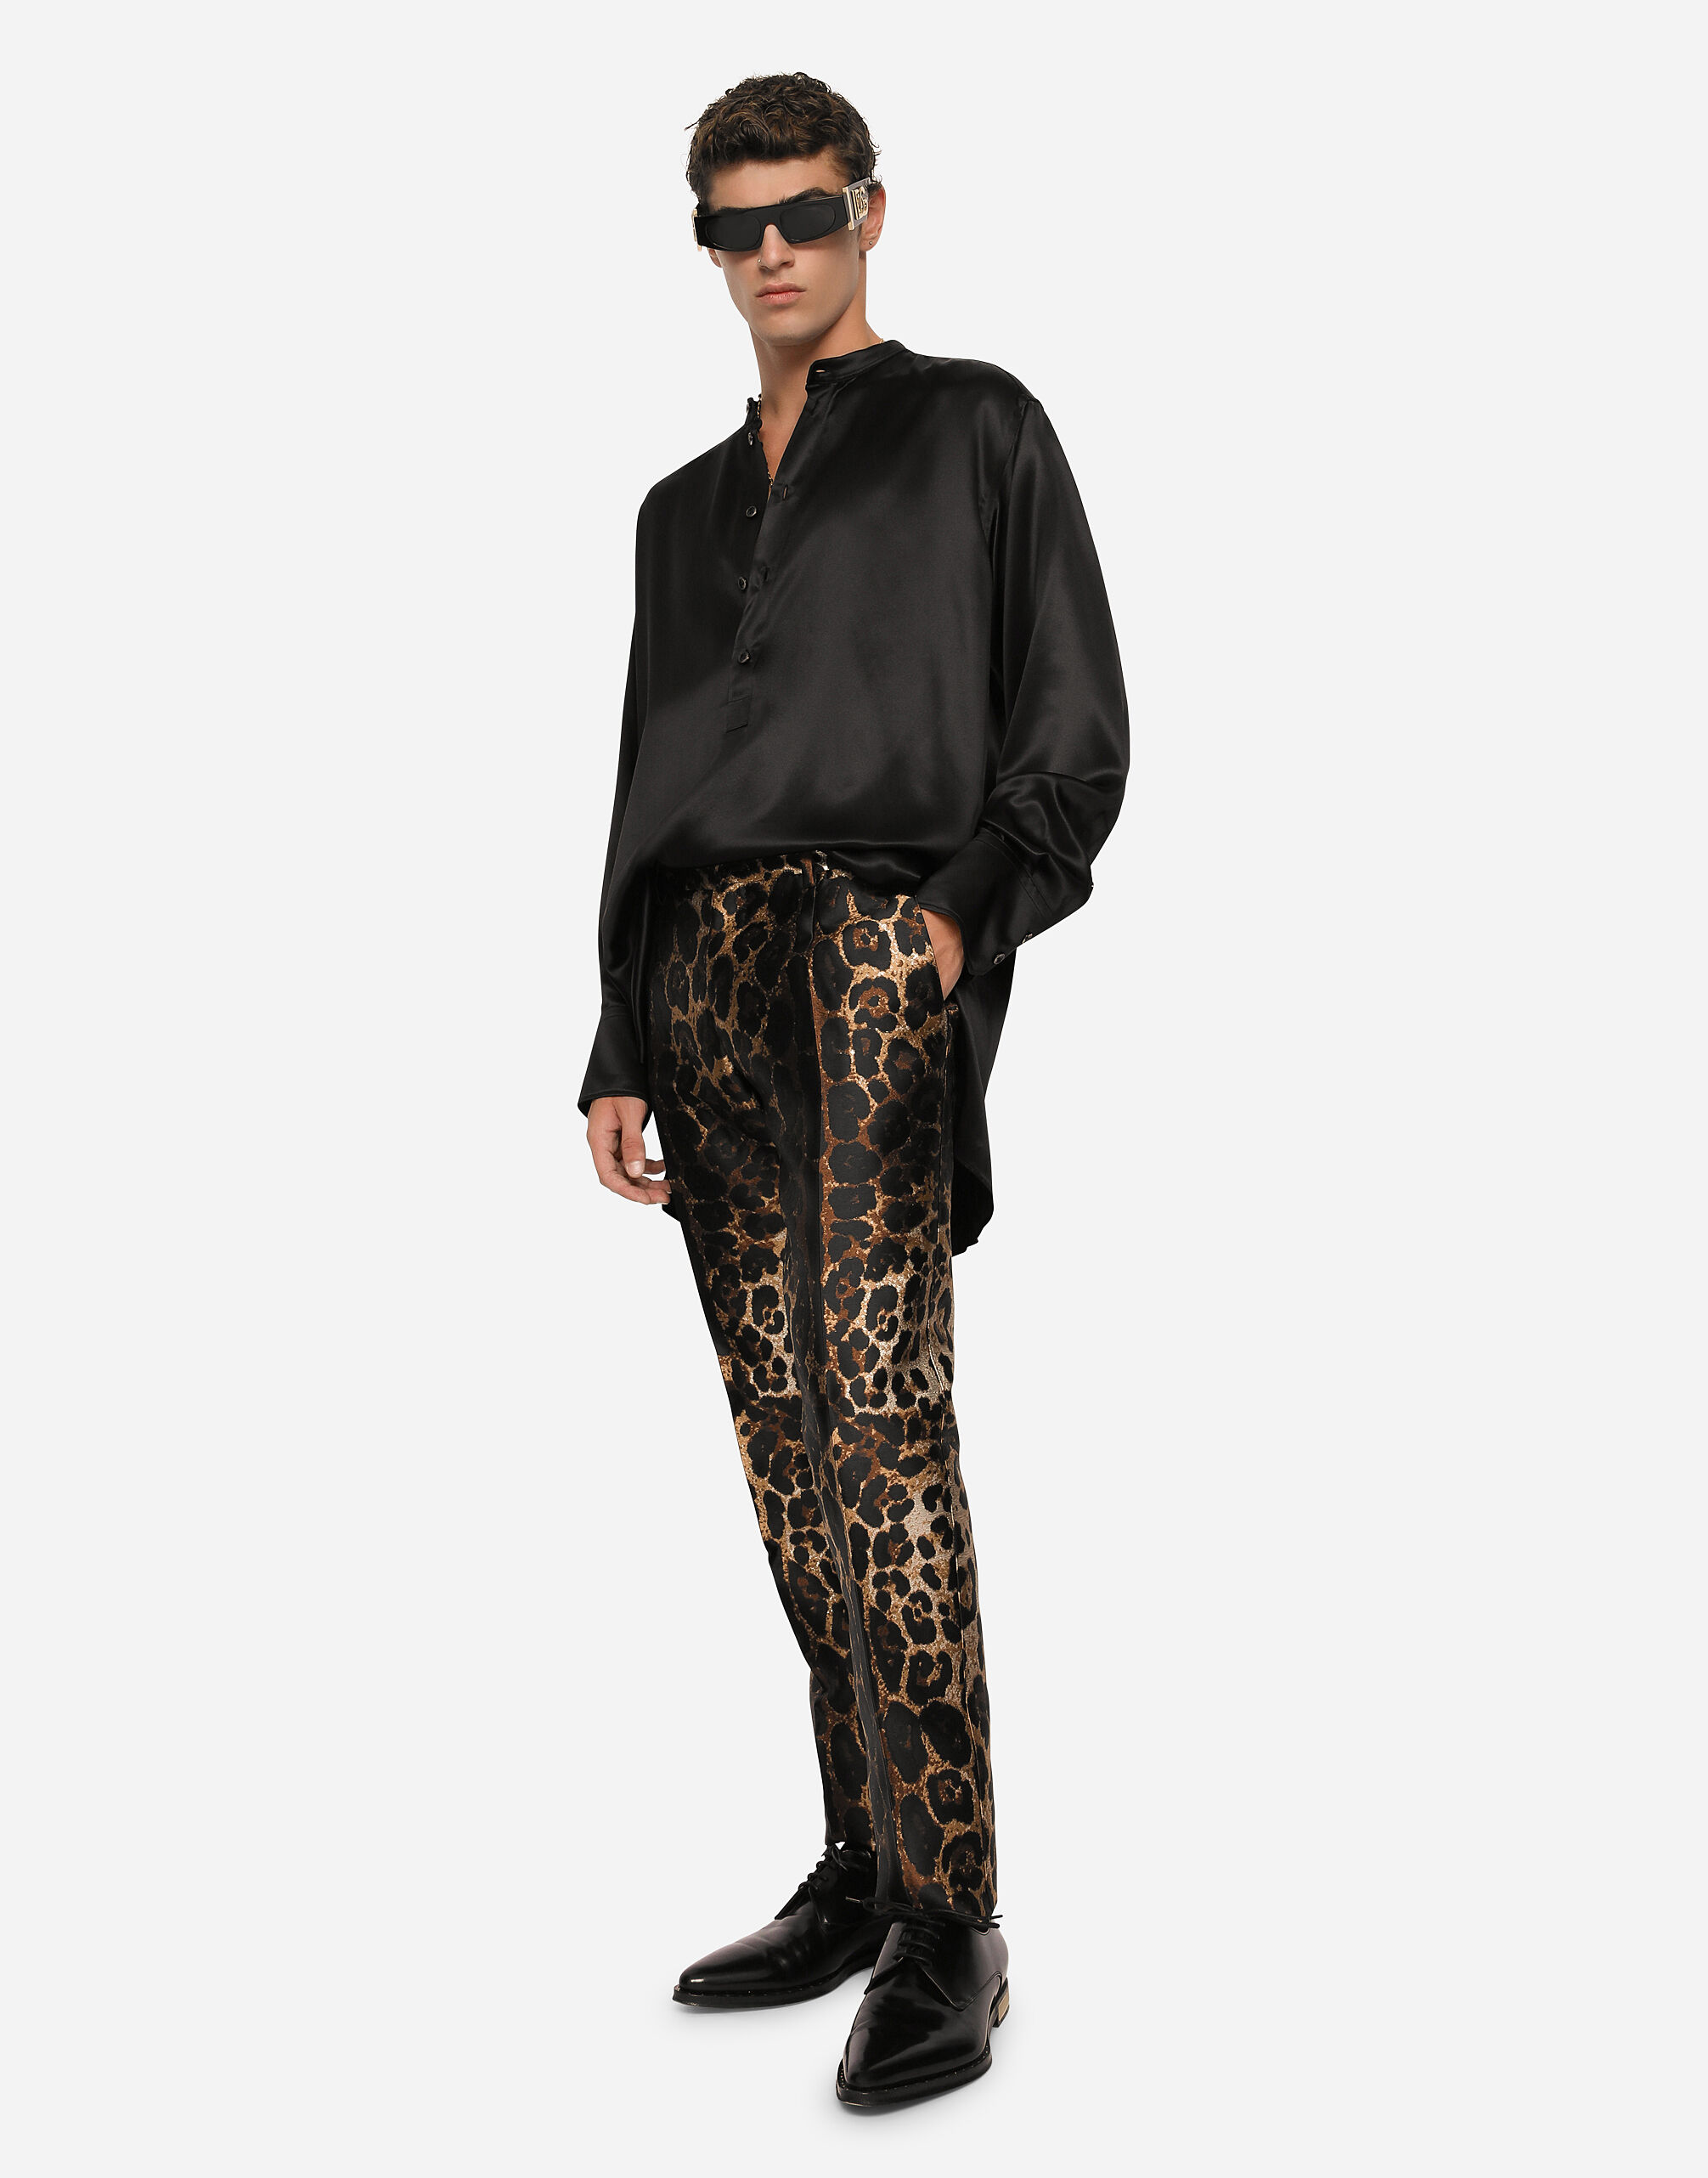 Jacquard pants with leopard design in Animal Print for